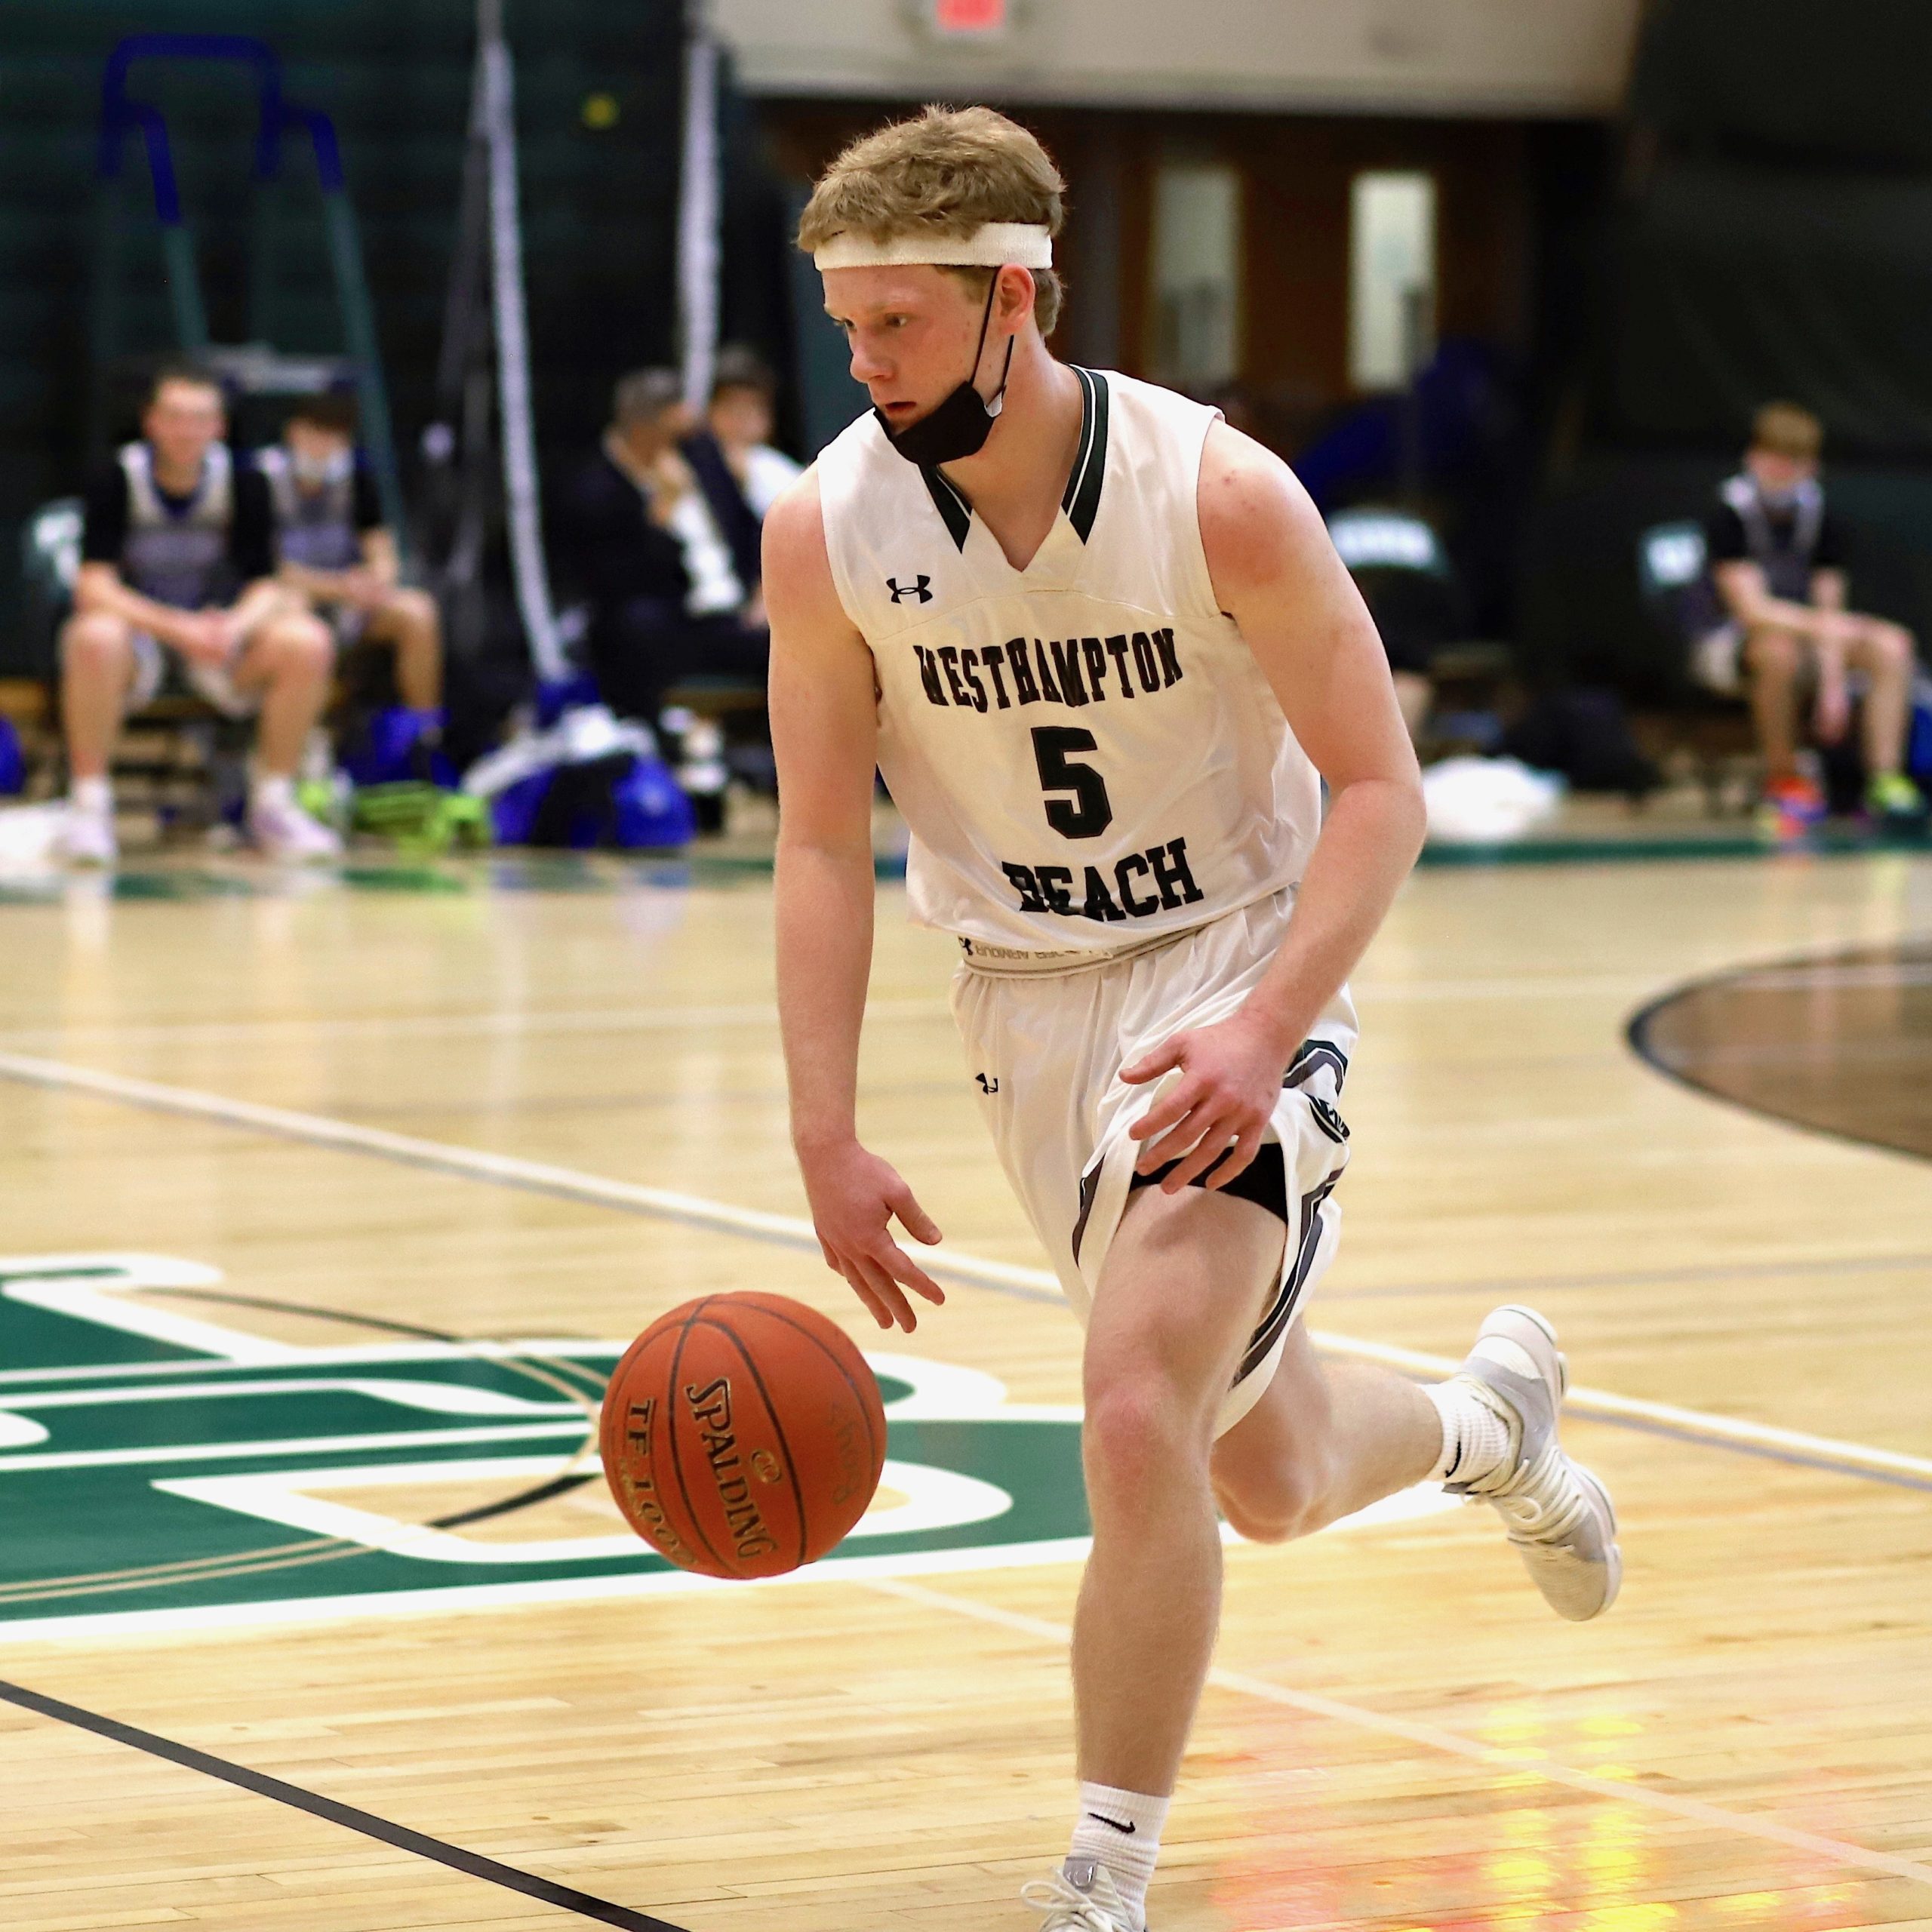 Westhampton Beach senior Nick Waszkelewicz scored over 100 points, which included 15 three-pointers, in seven games last season. CHRISTINE HEEREN